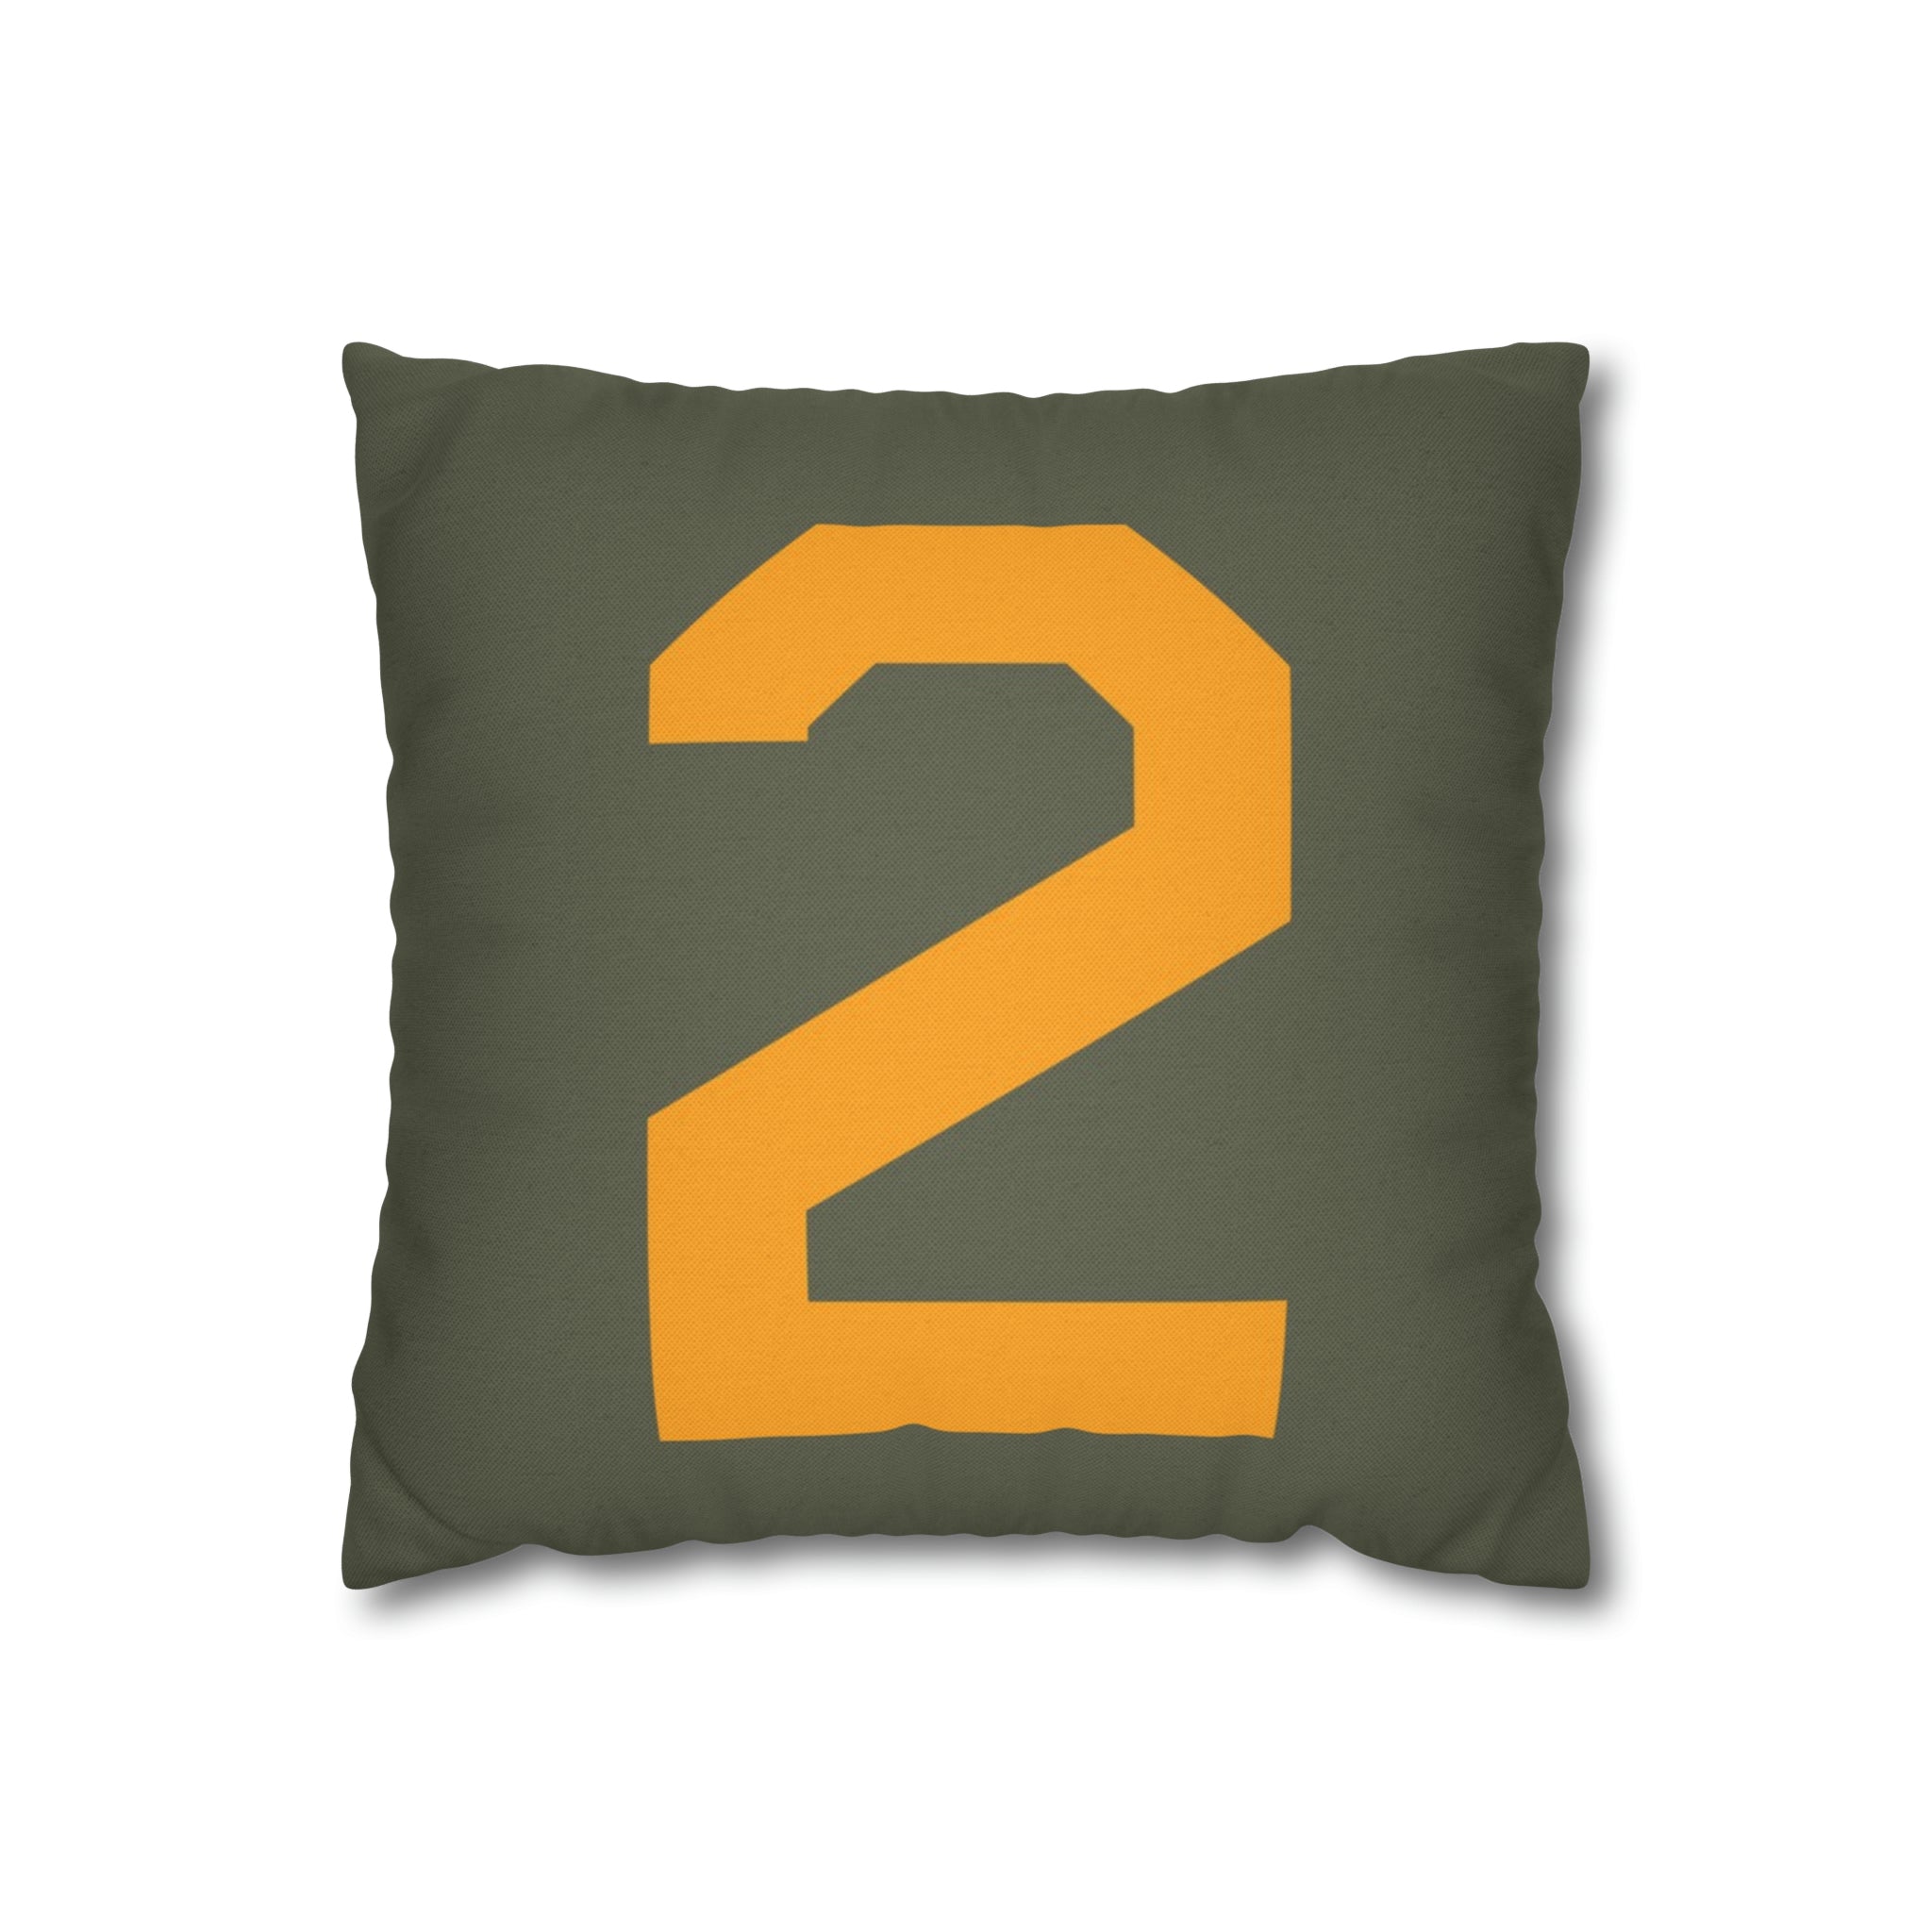 WWII USAAF Number "2" Square Pillowcase (Style A) - I Love a Hangar